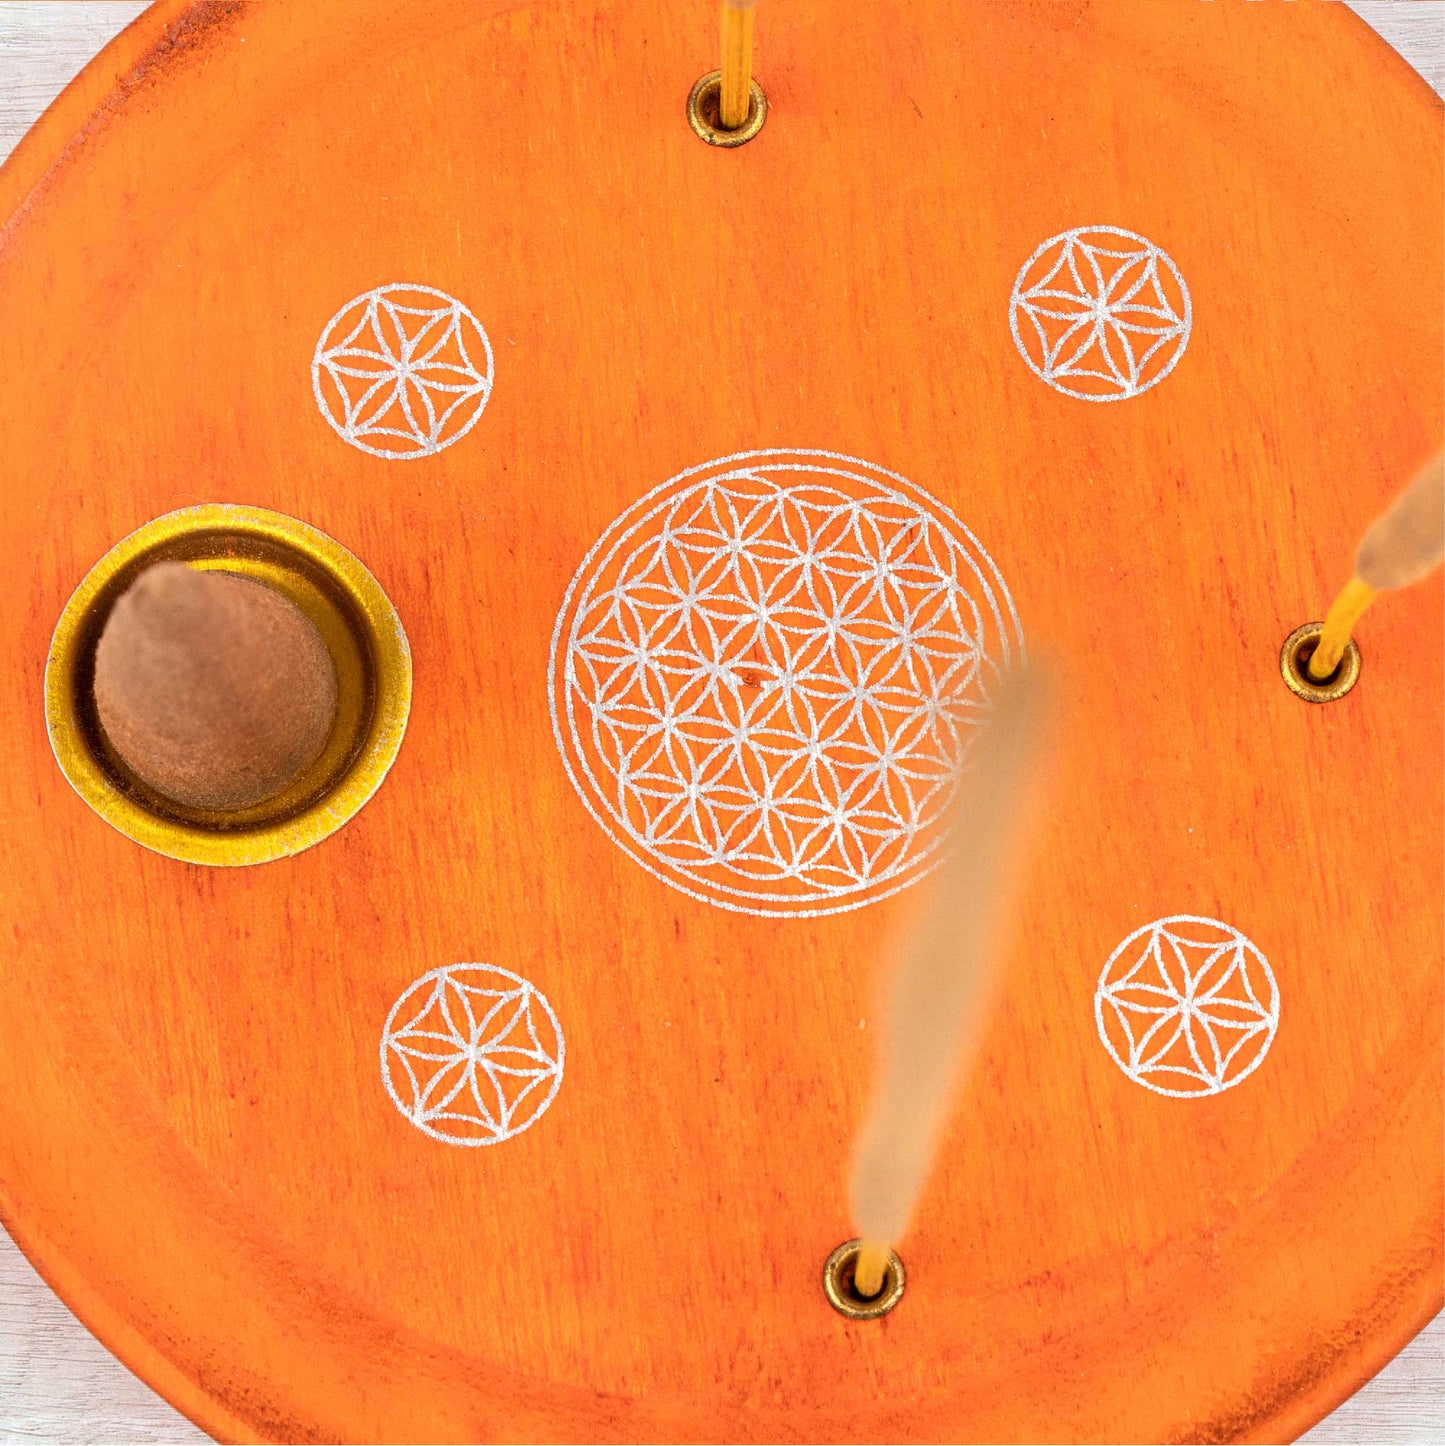 Incense Cone Plate - Flower Of Life Orange